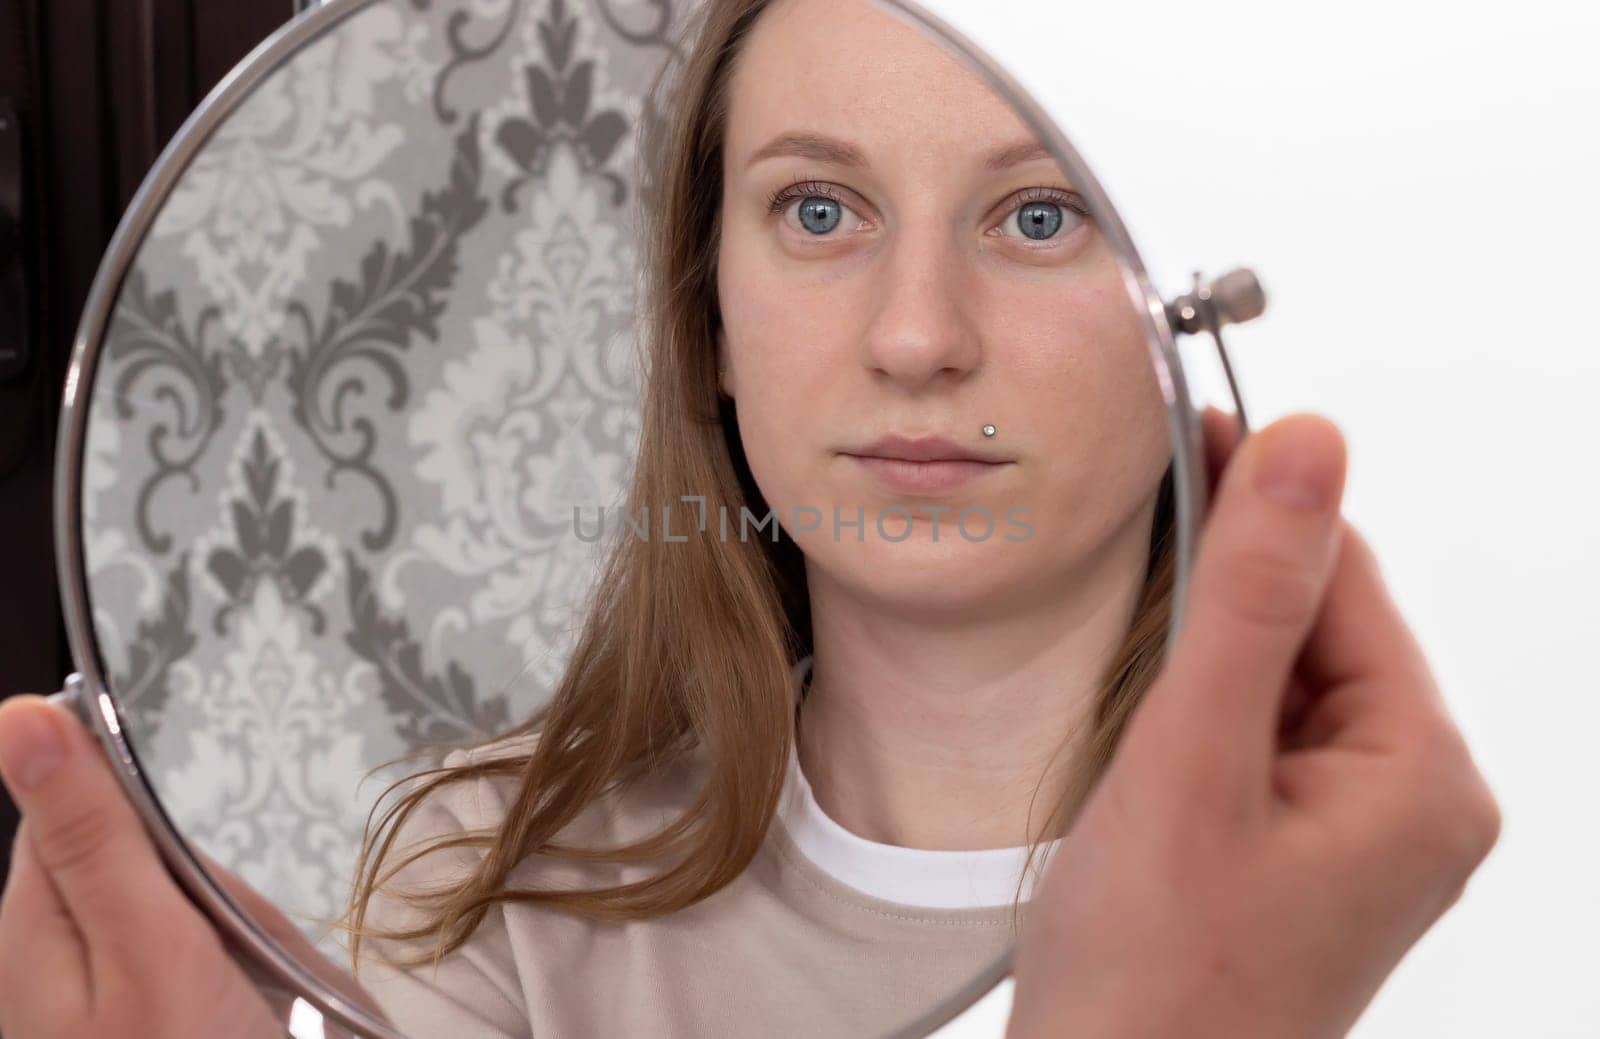 Portrait Of Caucasian Woman After Eyelash Lamination Procedure Looking At Own Reflection In Mirror. Horizontal Plane. High quality photo